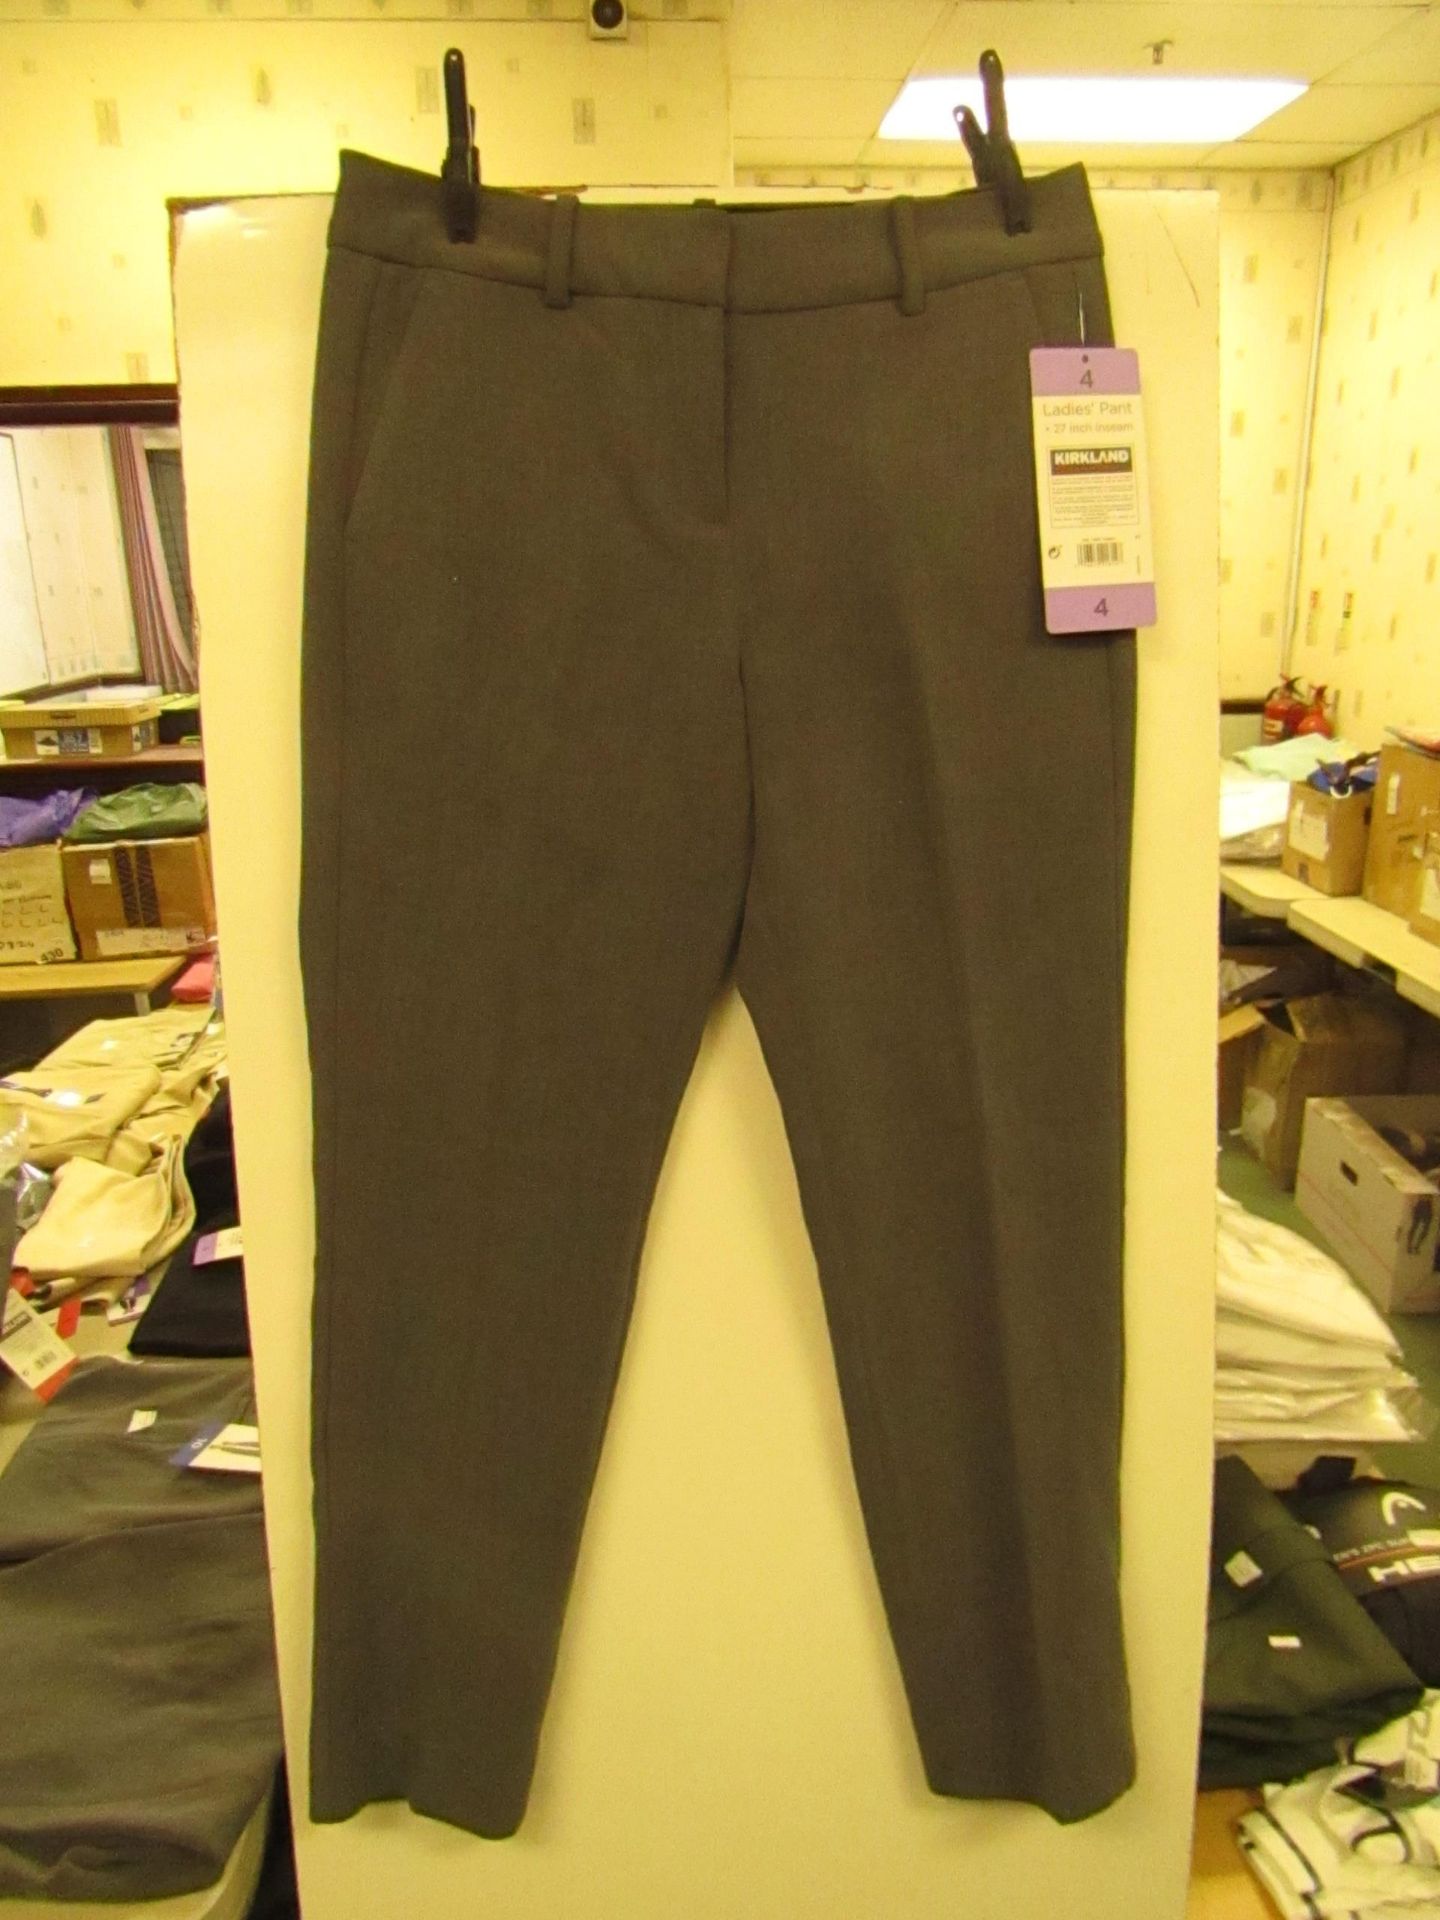 1X Kirkland Signature Ladies Pants - Size 4 - Grey - New with tags